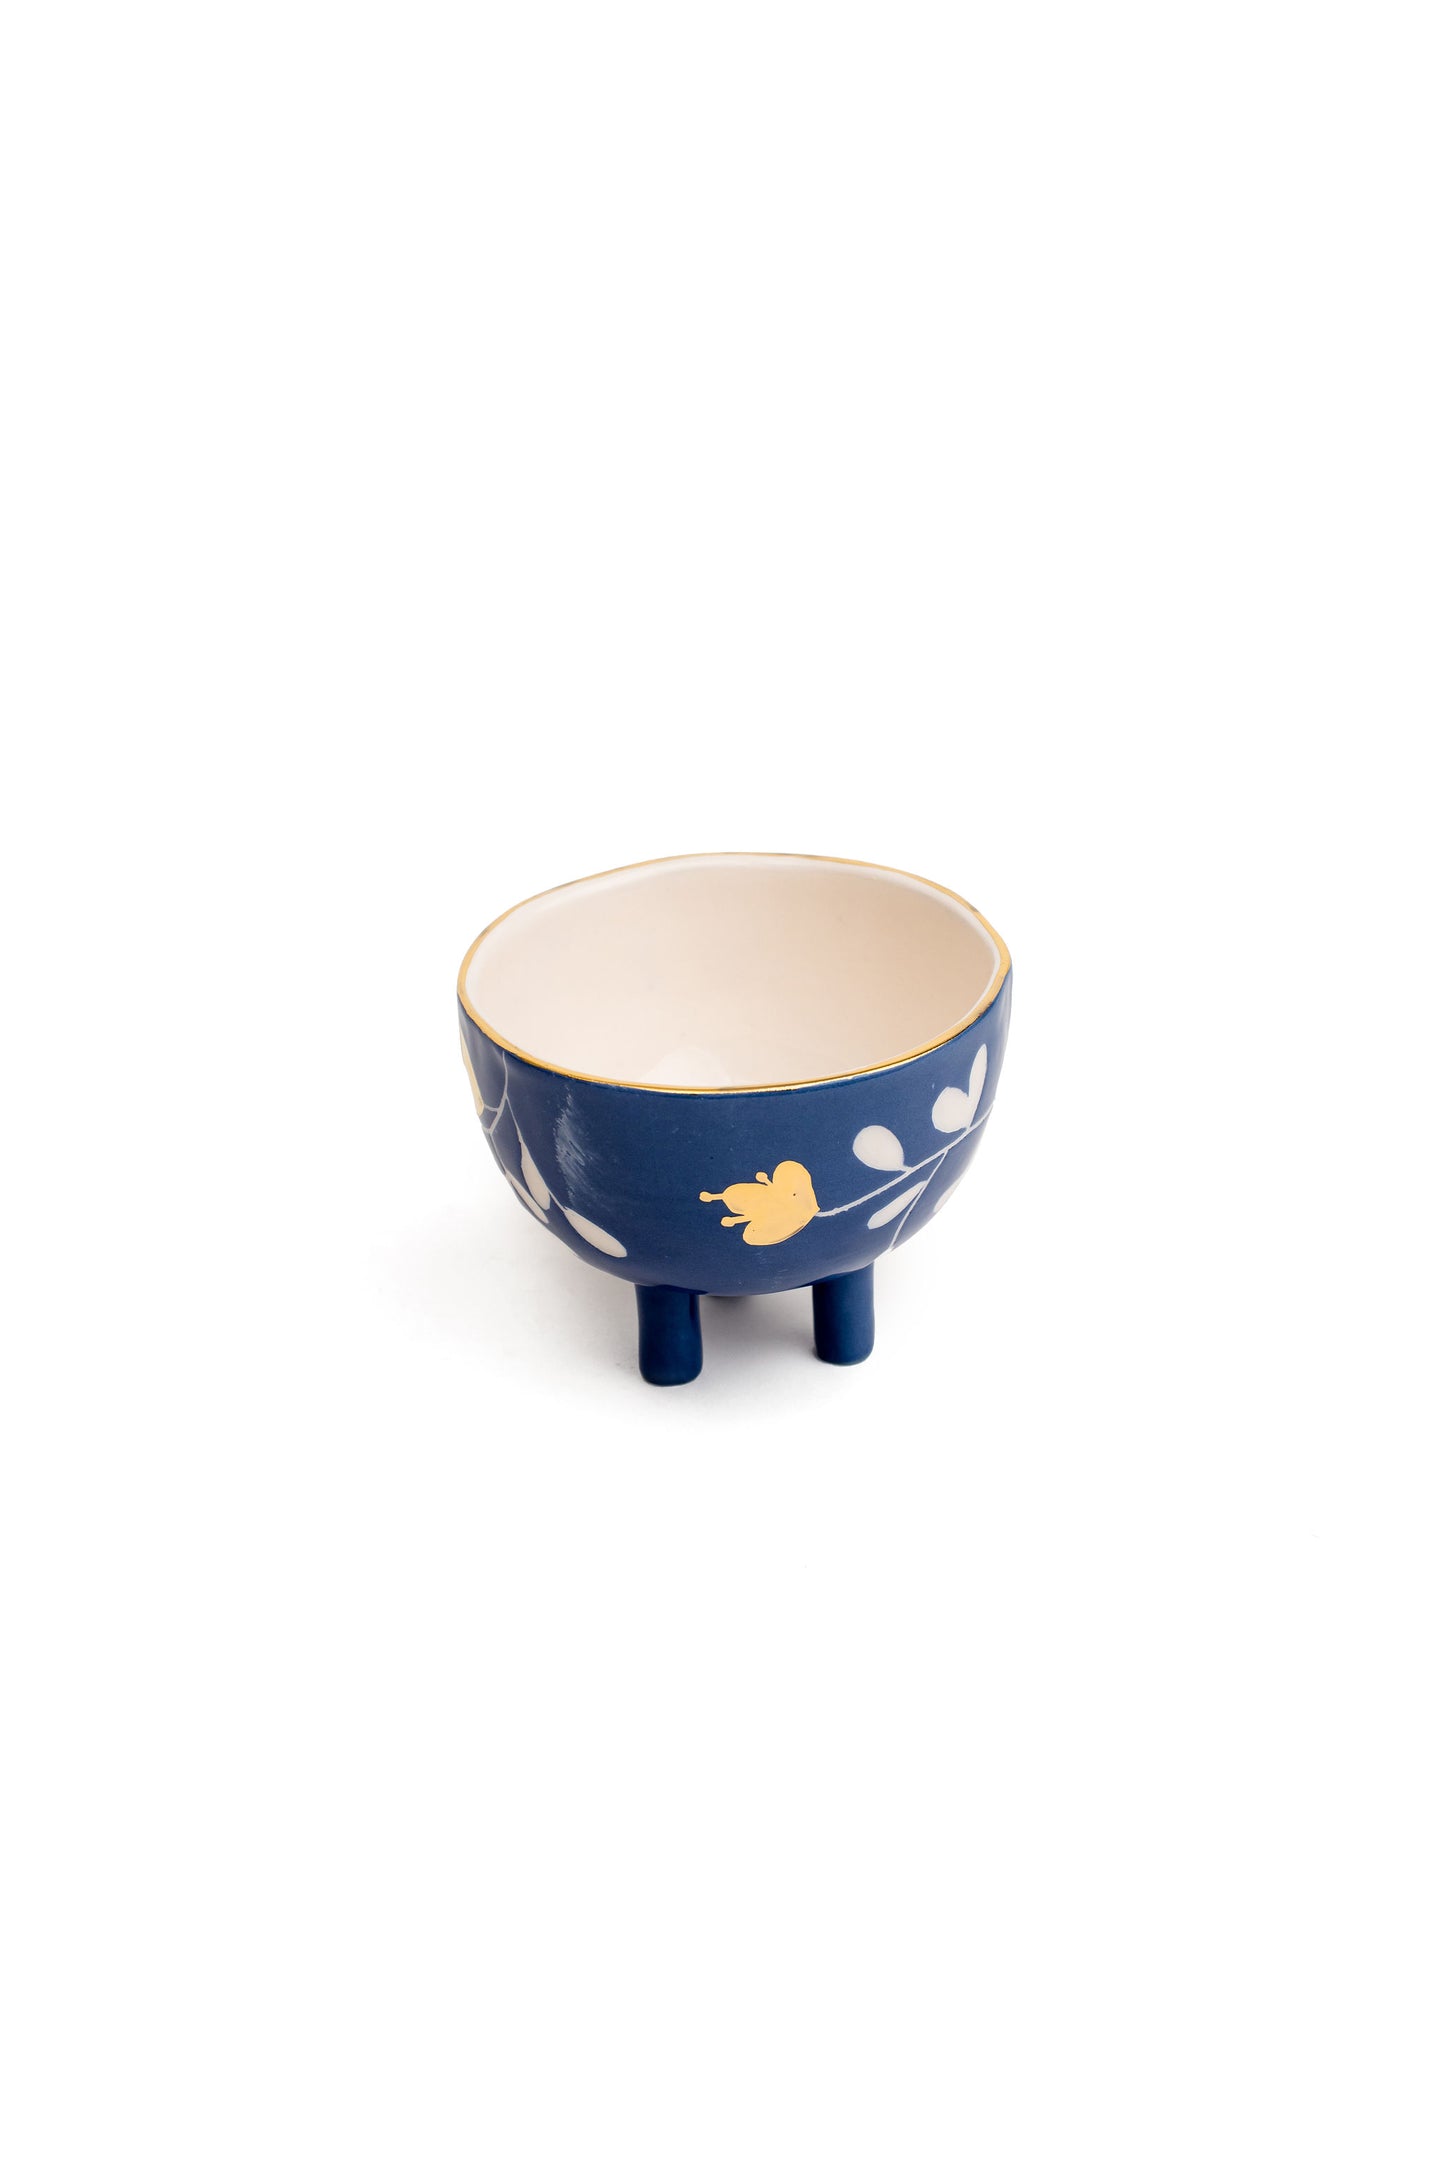 Floral Blue And White Bowls